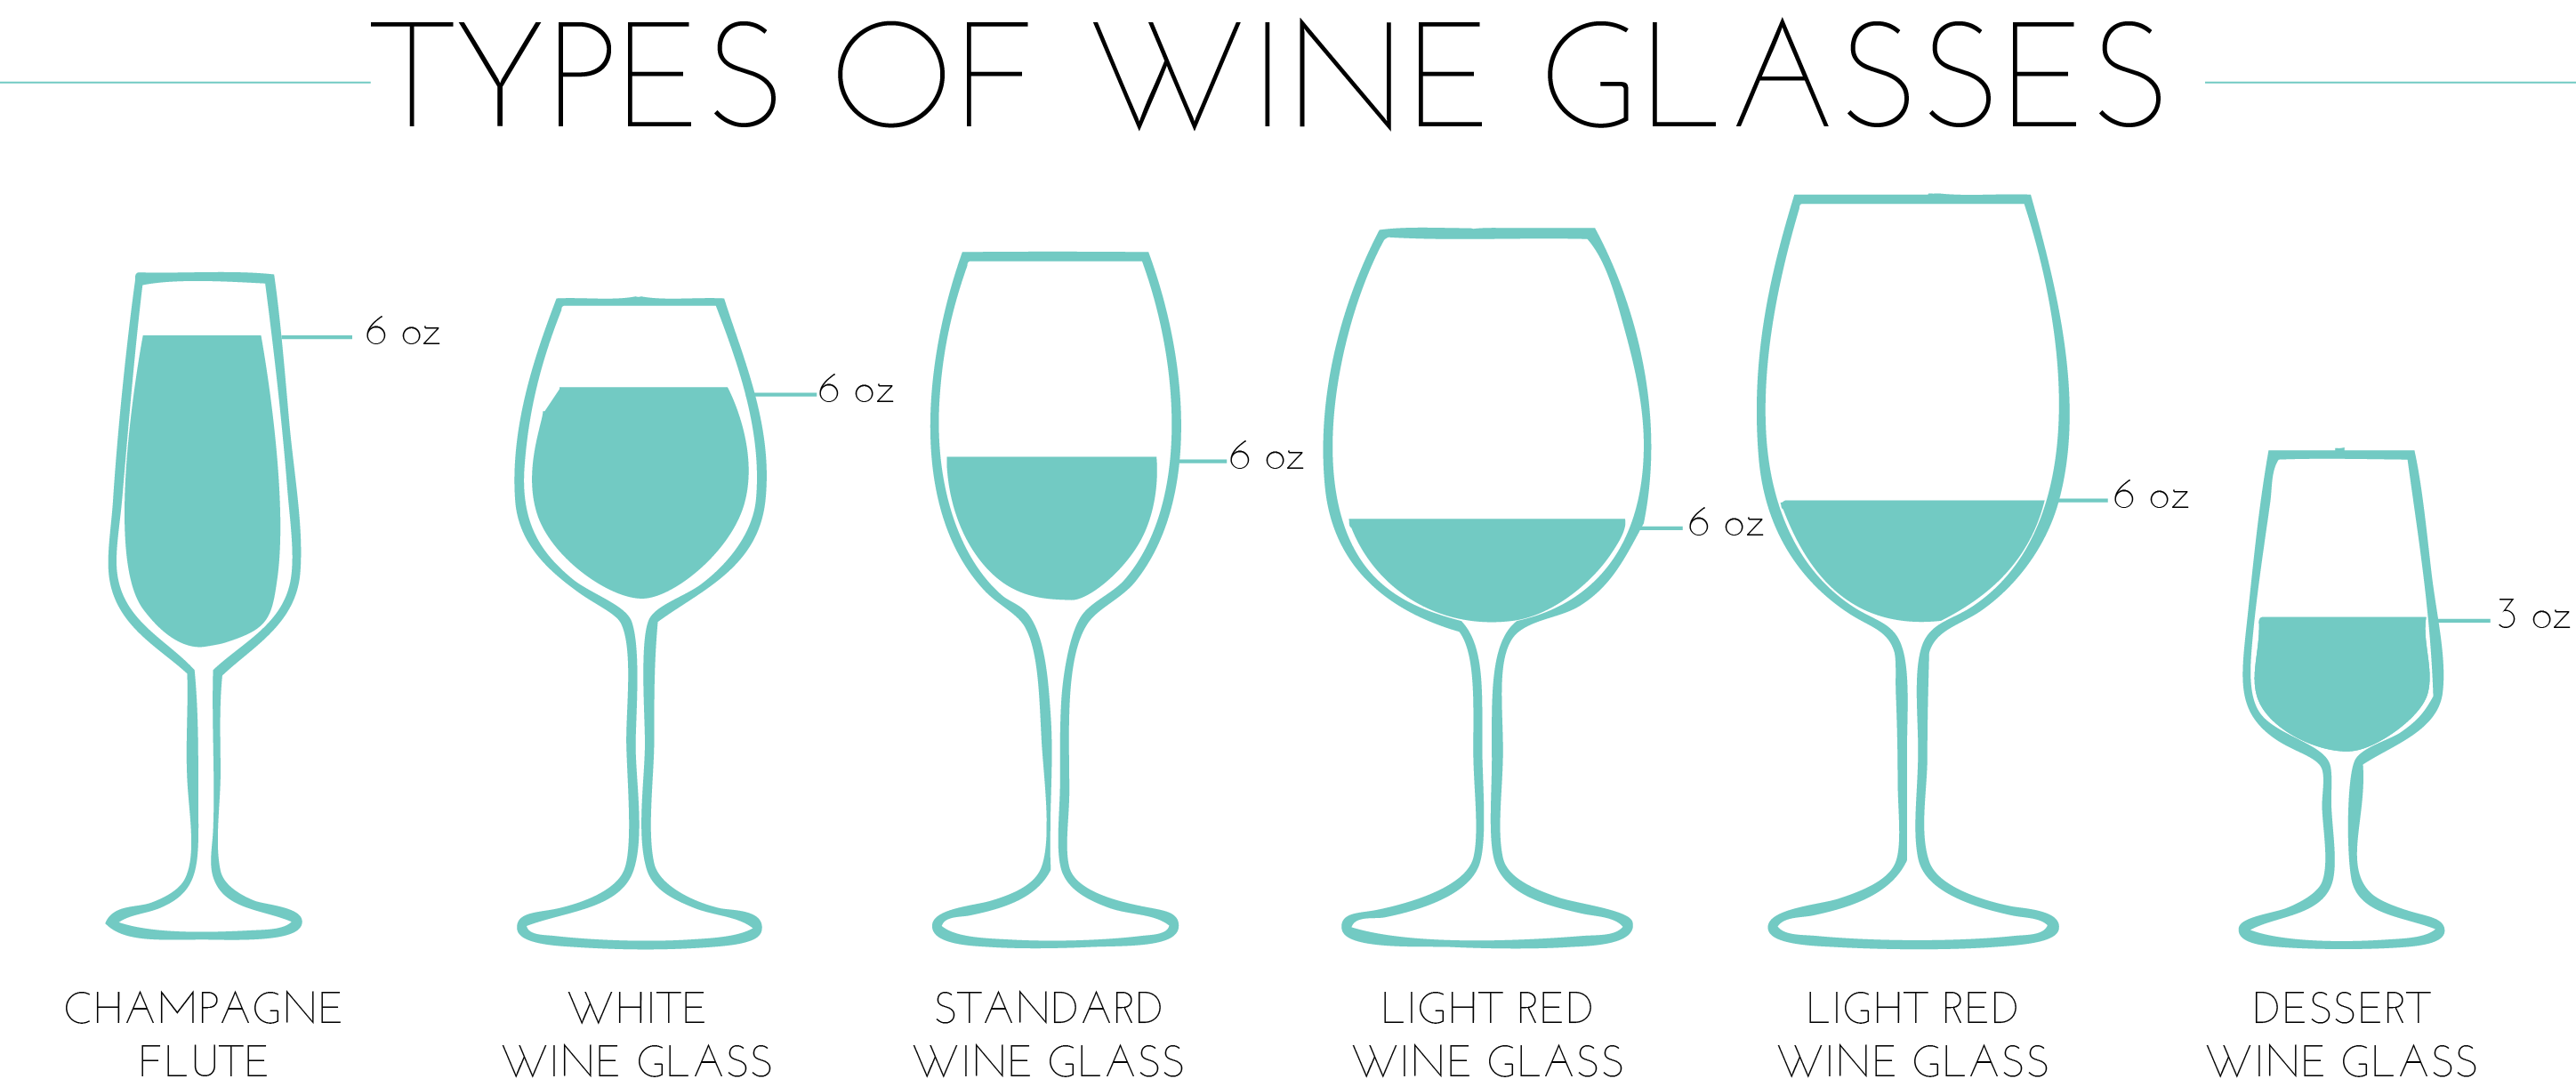 wine glass shapes and names